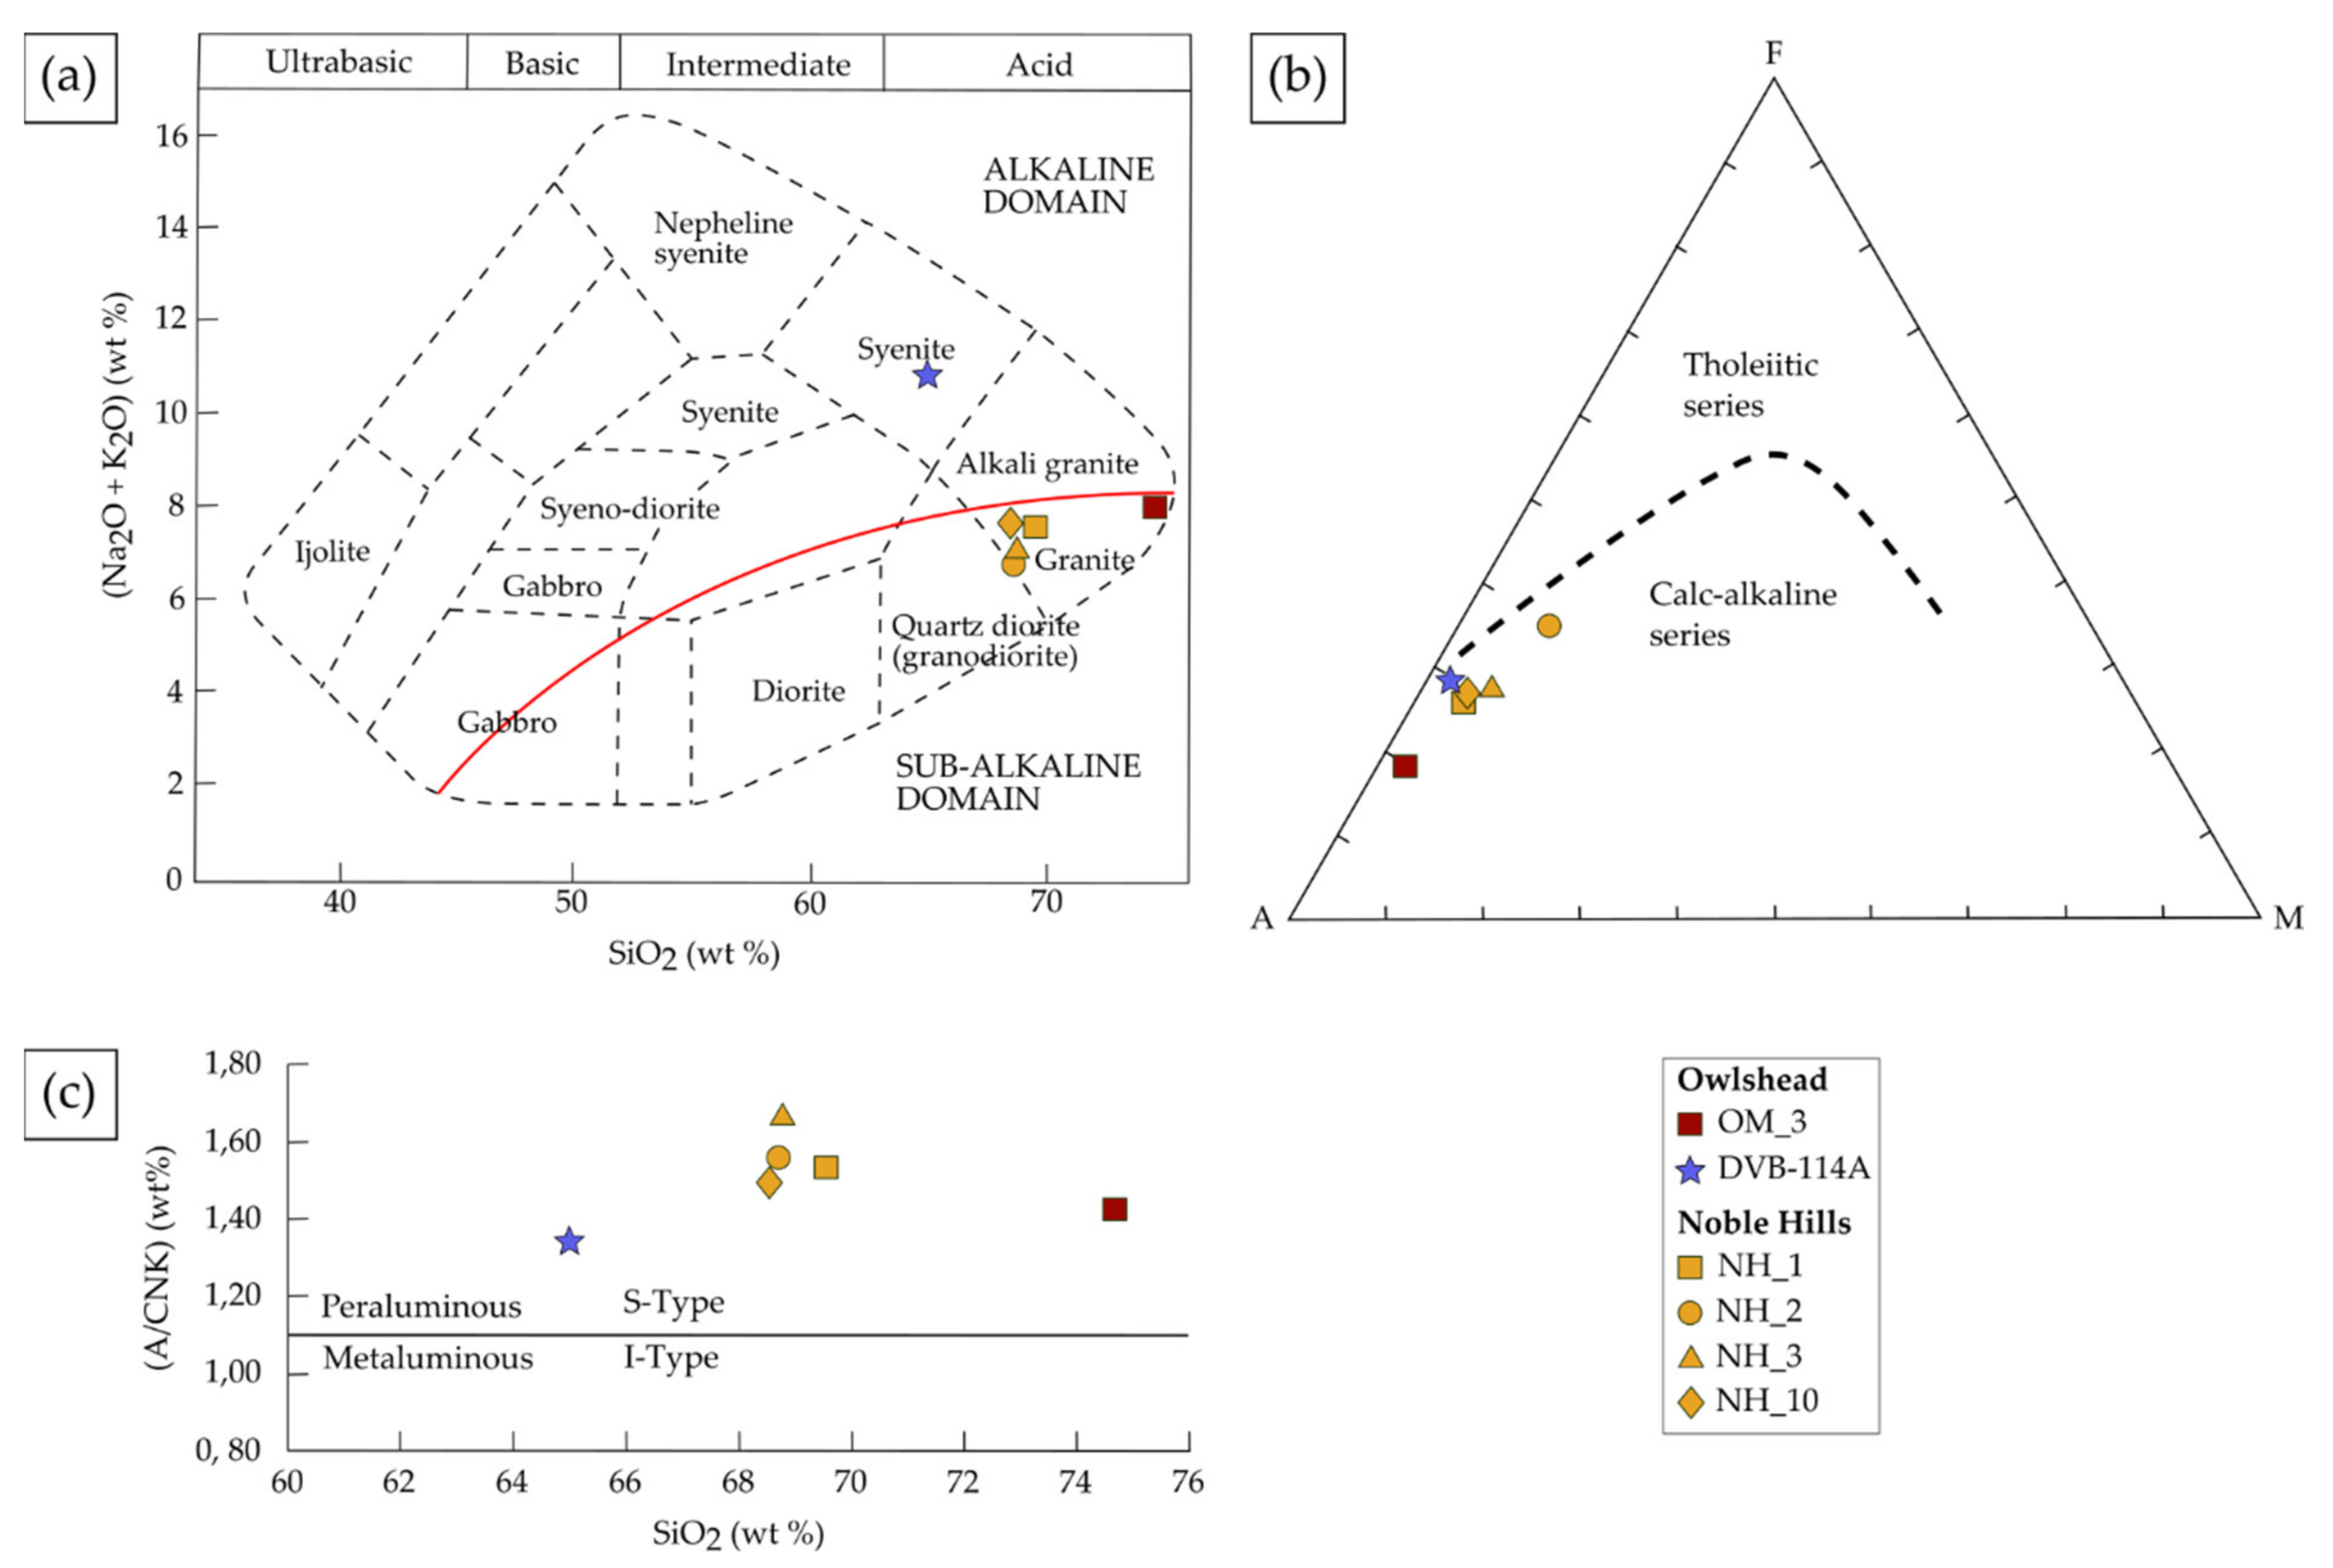 Geosciences | Free Full-Text | Fluid-Rock Interactions in a  Paleo-Geothermal Reservoir (Noble Hills Granite, California, USA). Part 1:  Granite Pervasive Alteration Processes away from Fracture Zones | HTML